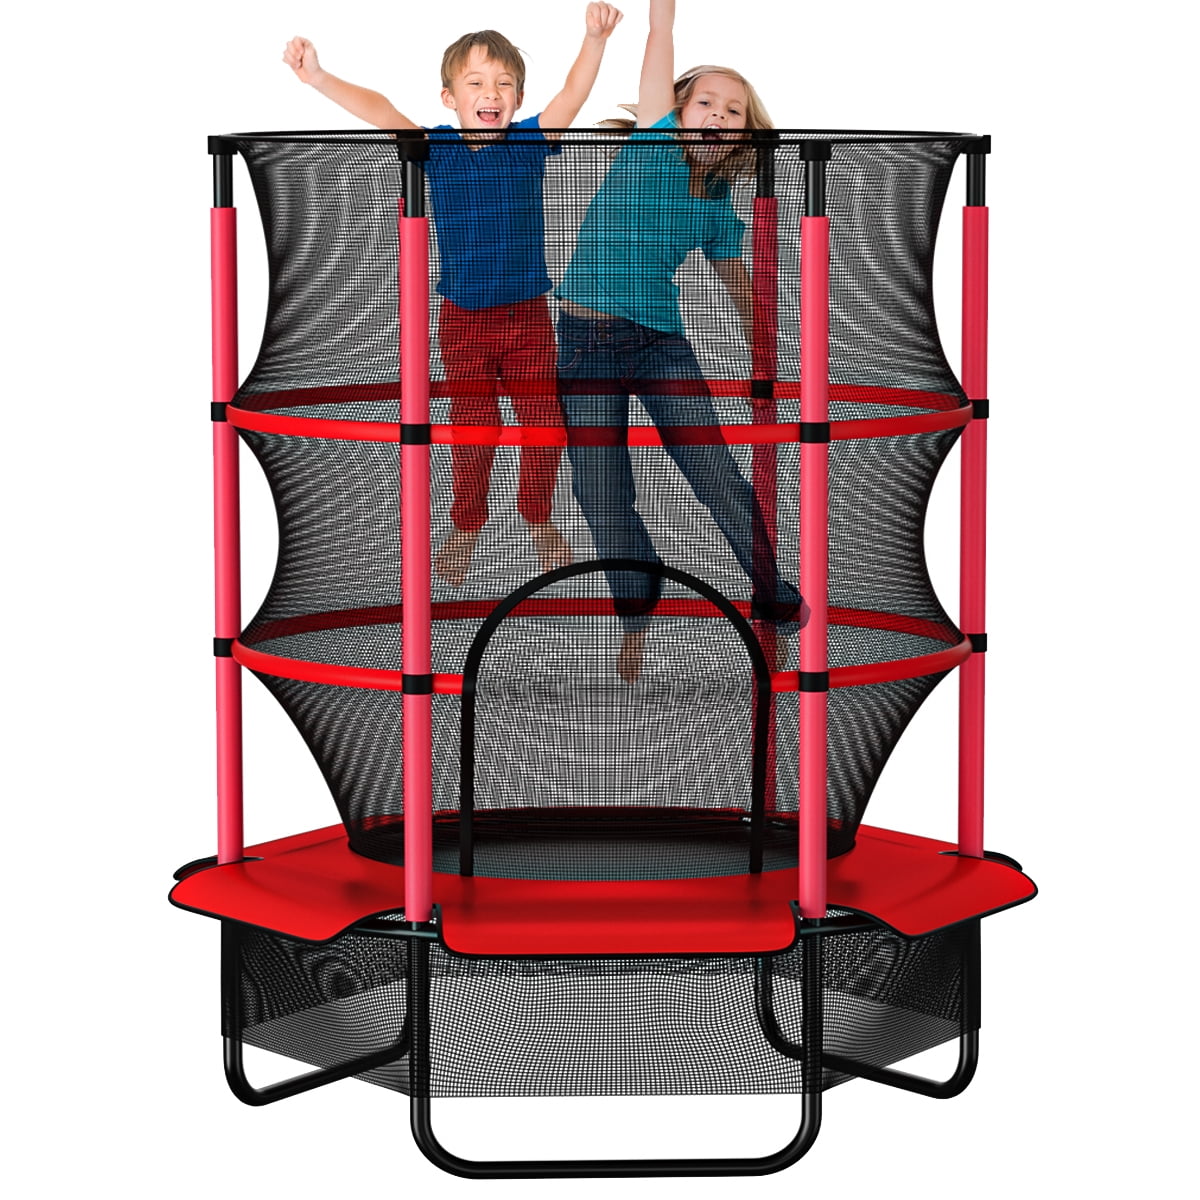 Kids Trampoline for 3-7 Year Old Toddlers (No Spring Hooks, Less Hurt), Small Trampoline Safety Enclosure Net and Metal Frame，Indoor/Outdoor Bounce Jumper,Playground Activity Playset